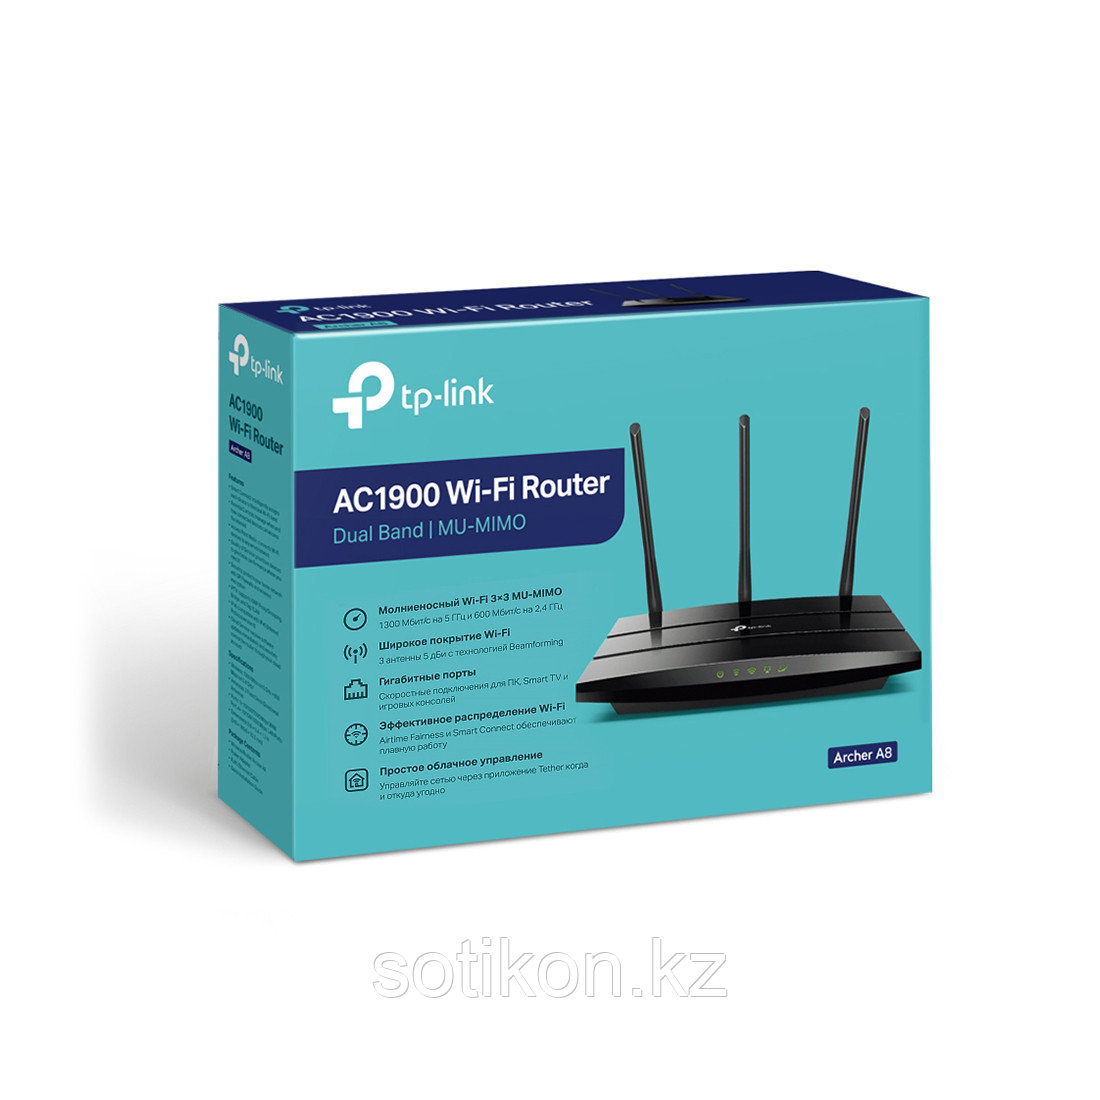 Маршрутизатор TP-Link Archer A8 - фото 3 - id-p104444089